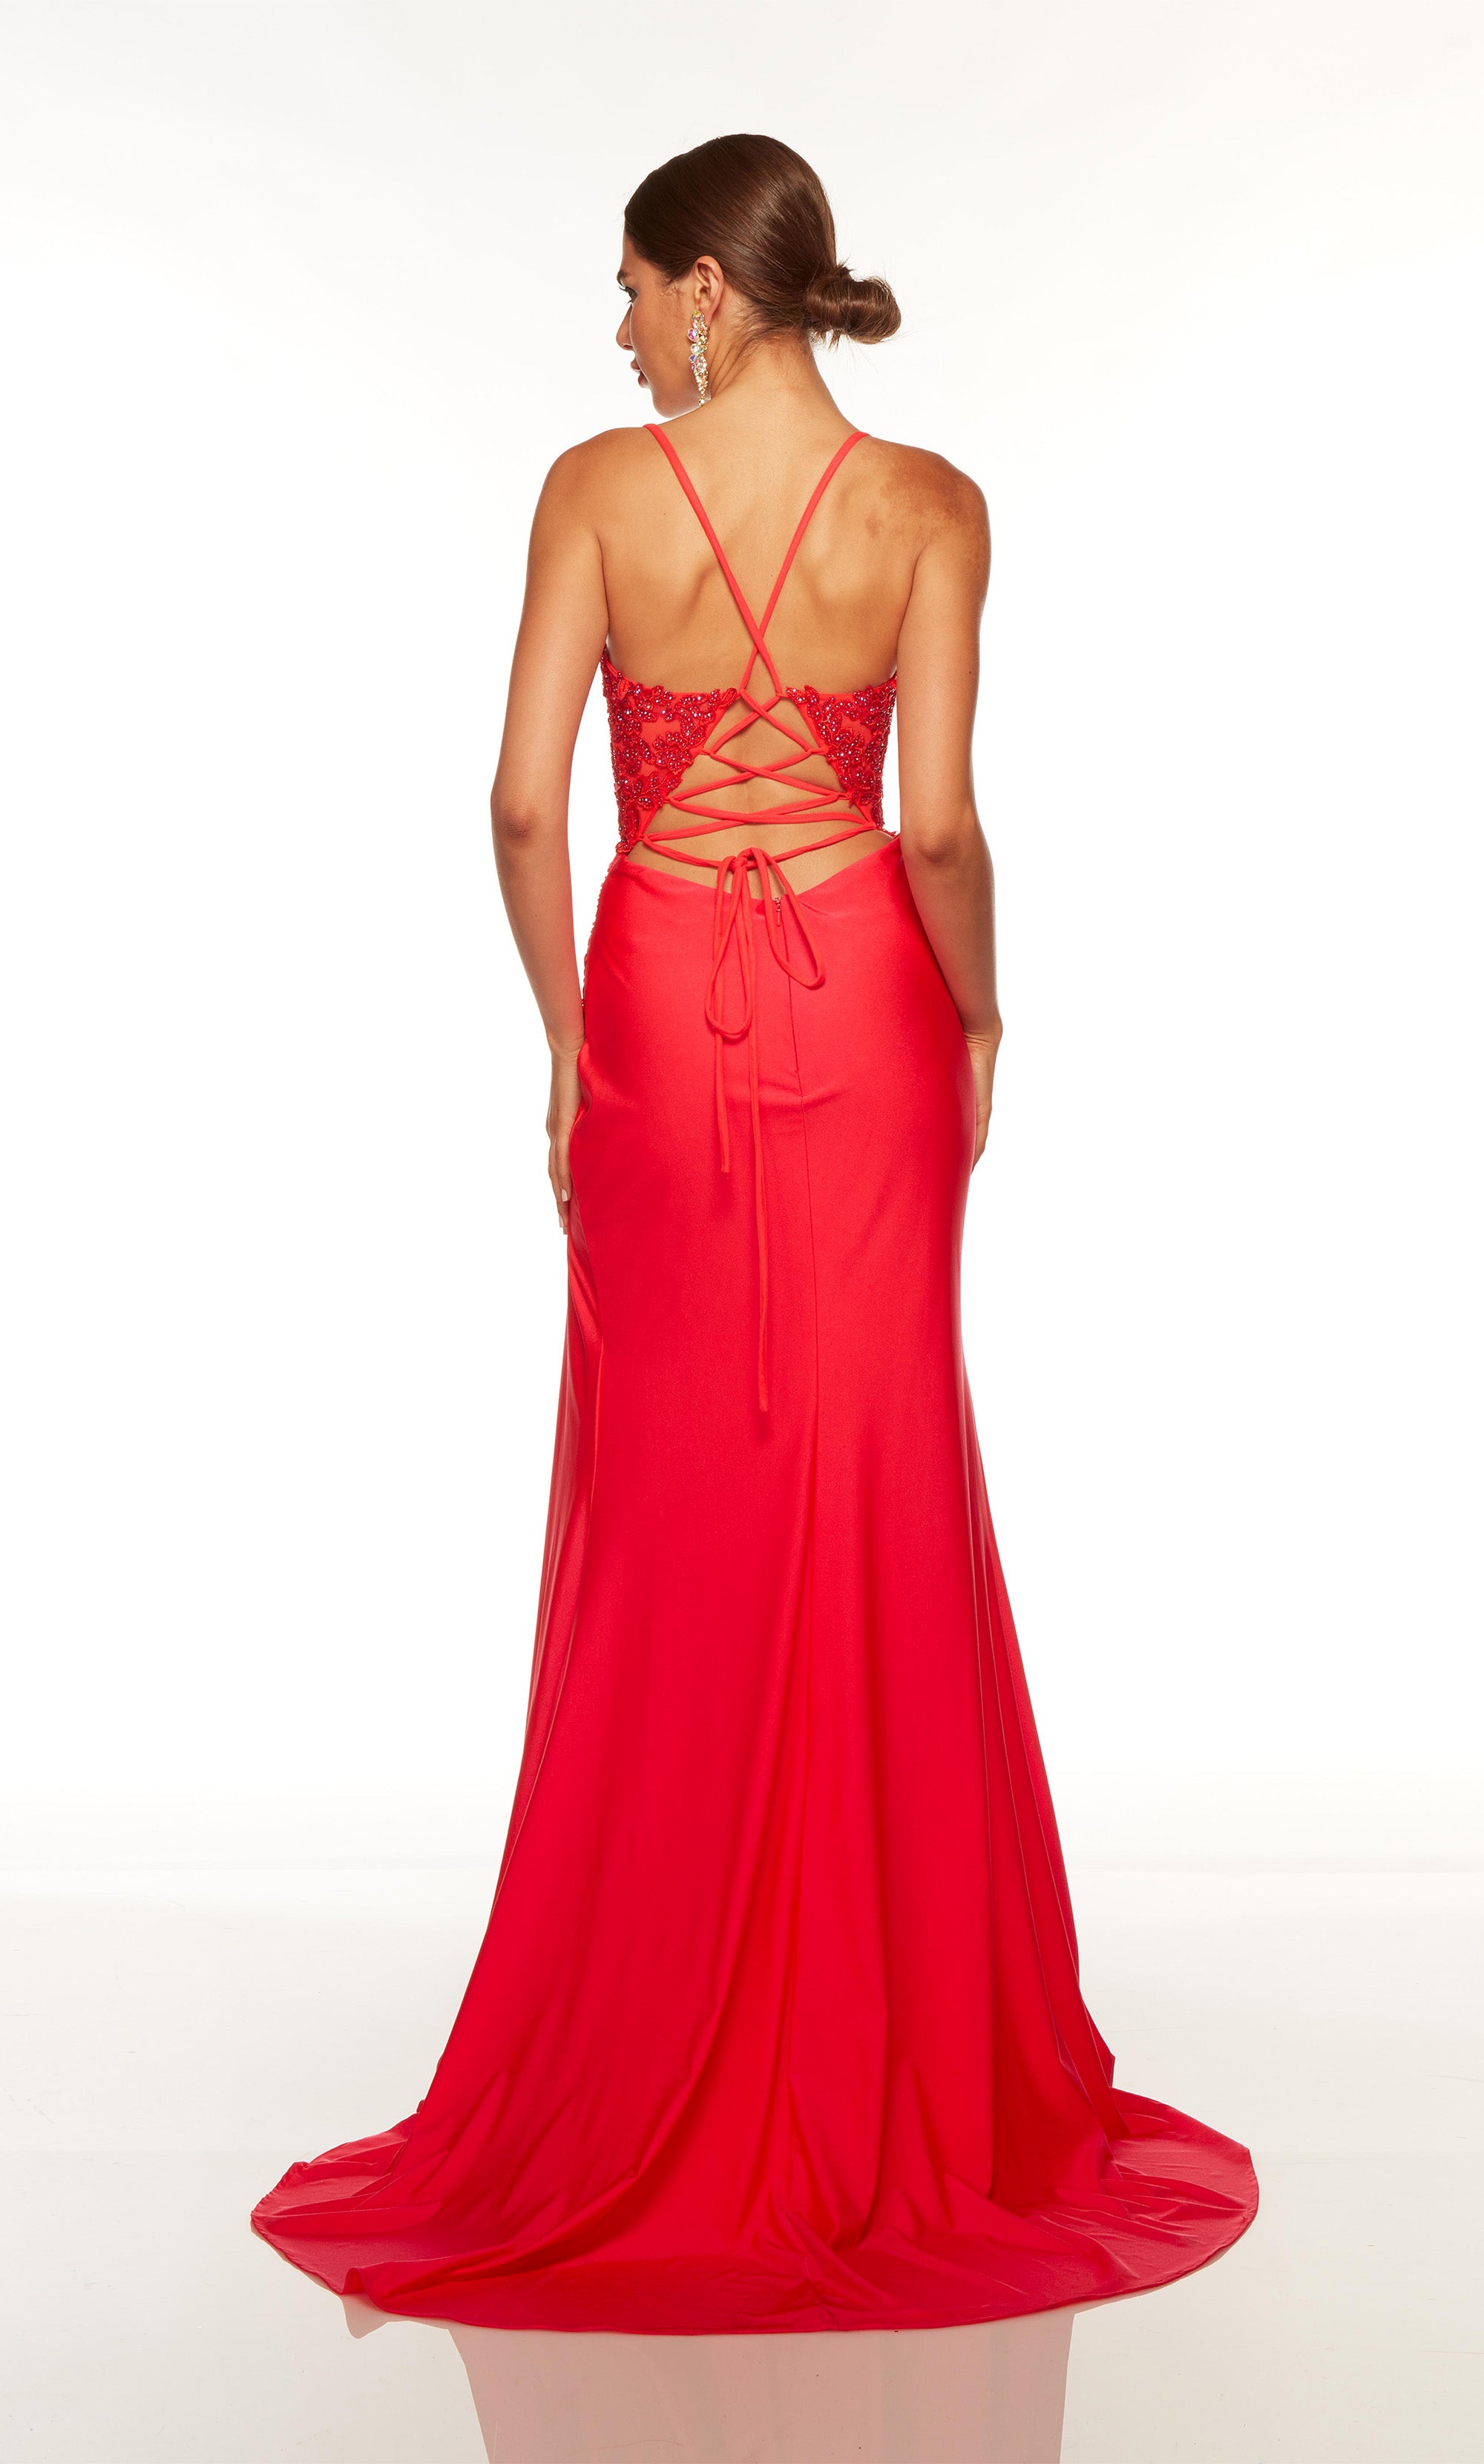 Formal Dress: 61469. Long, Scoop Neck, Straight, Strappy Back | Alyce Paris